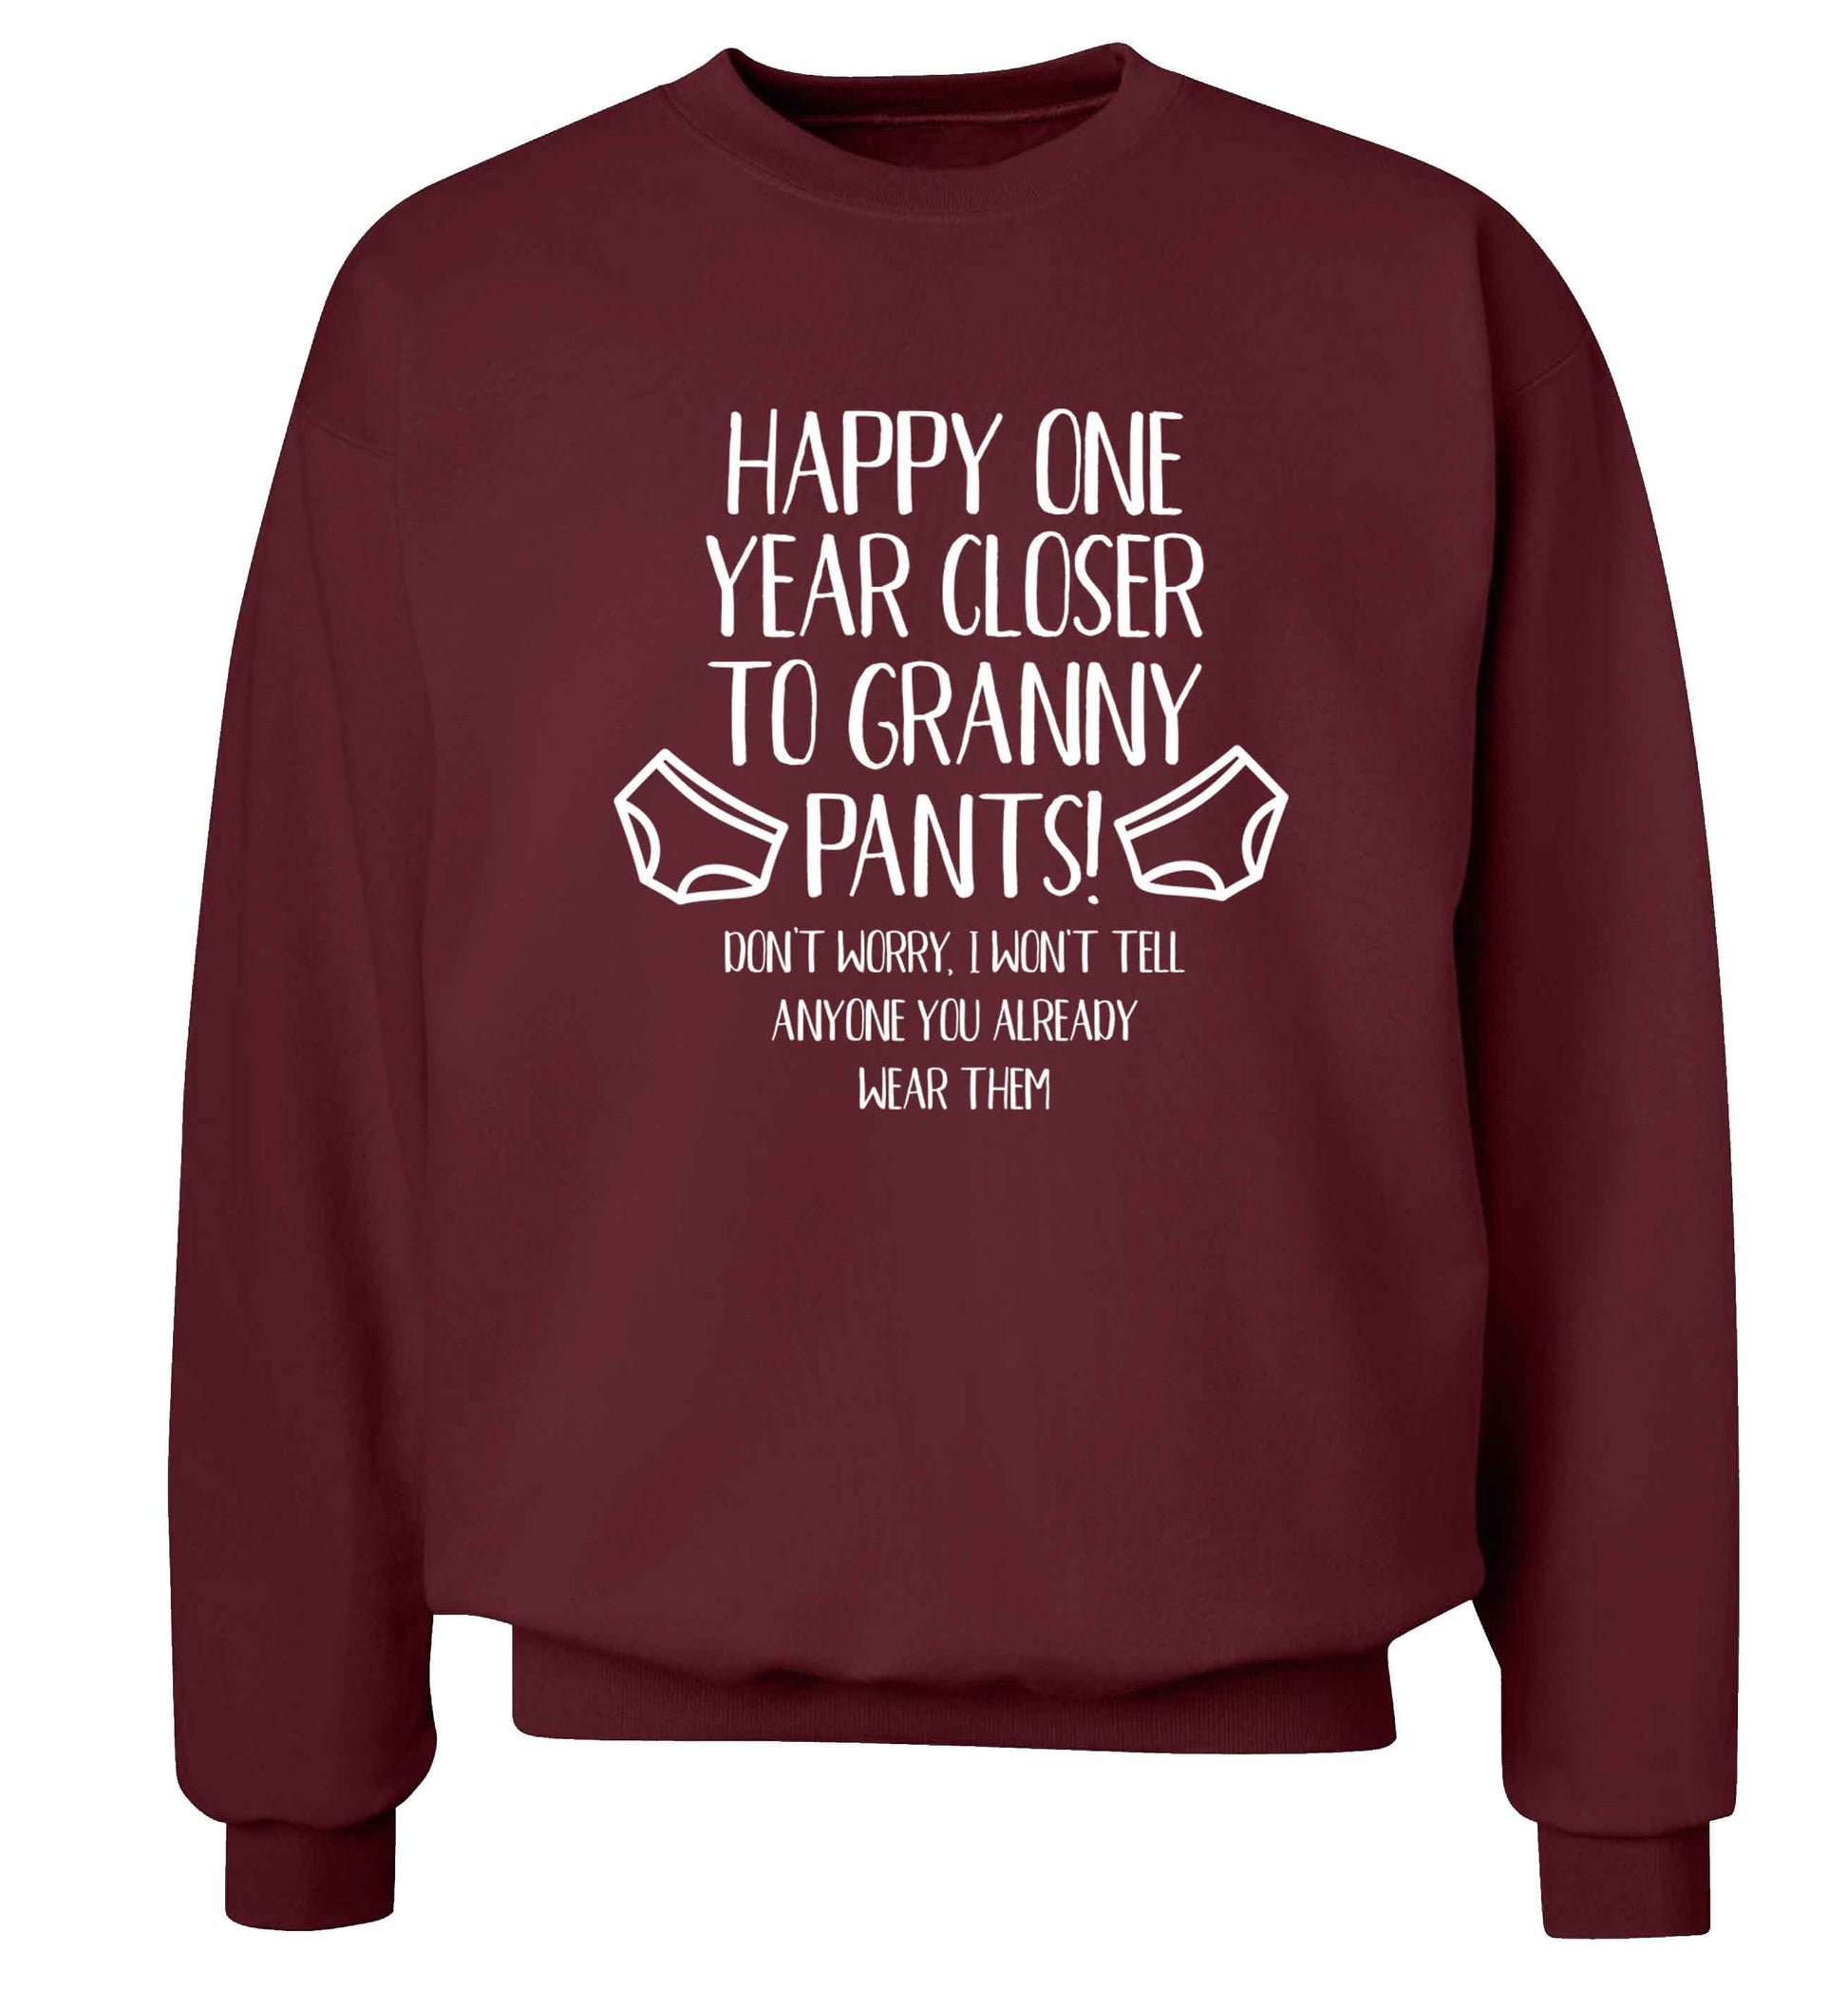 Happy one year closer to granny pants Adult's unisex maroon Sweater 2XL